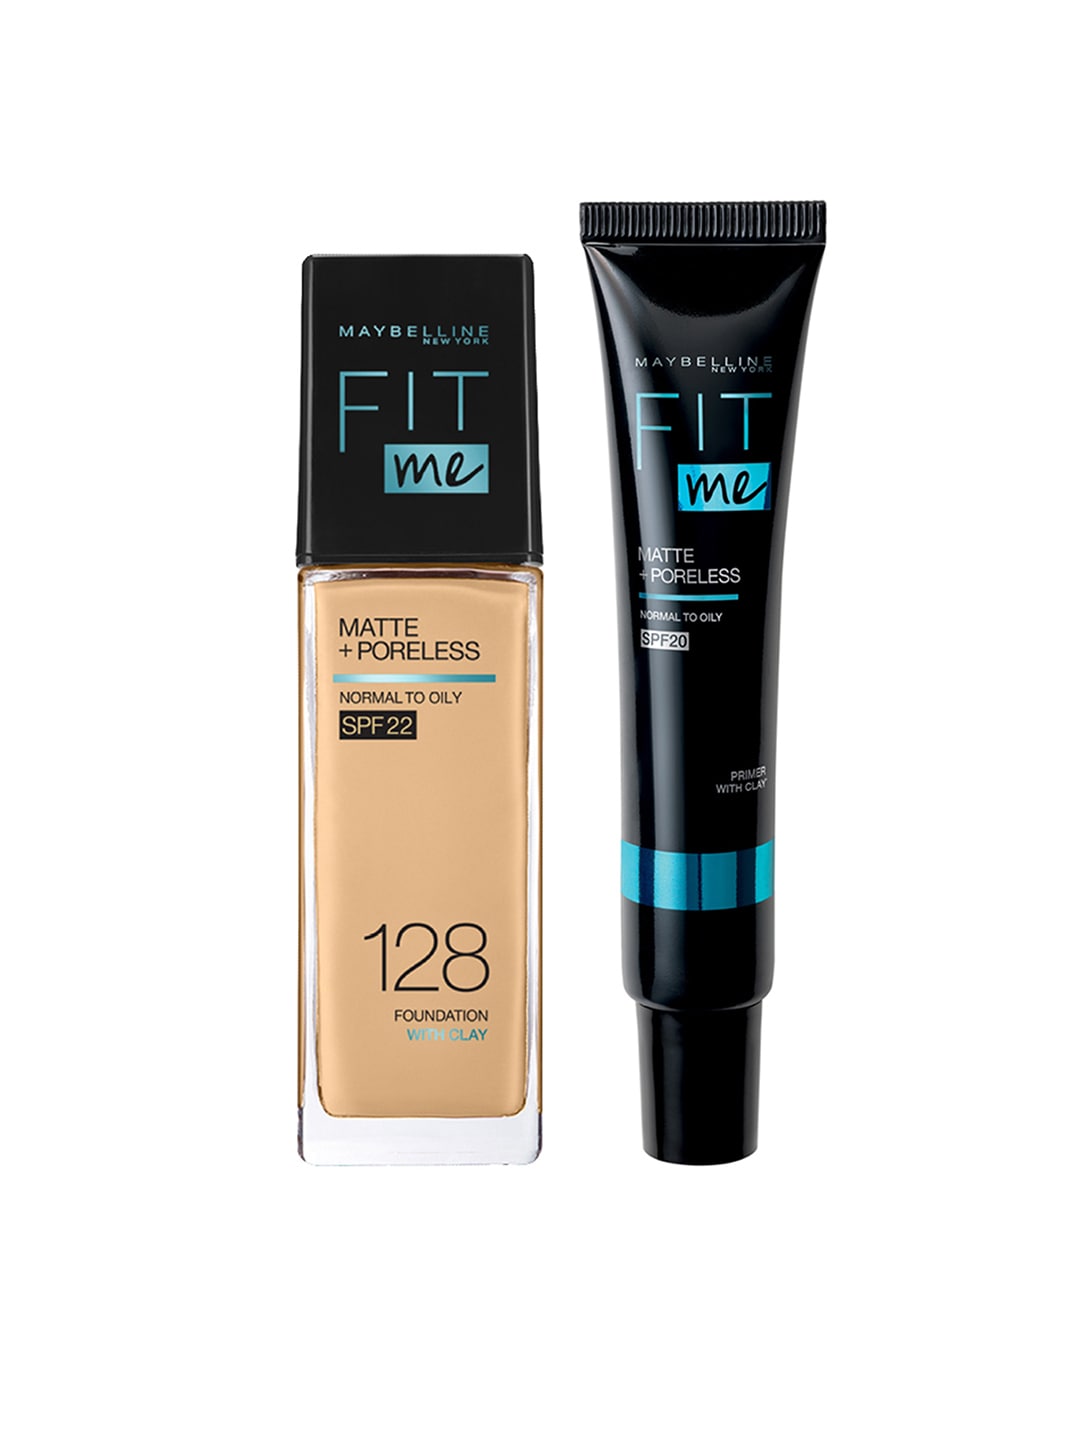 Maybelline New York Set of Fit Me Matte+Poreless Primer & Foundation 30 ml each Price in India